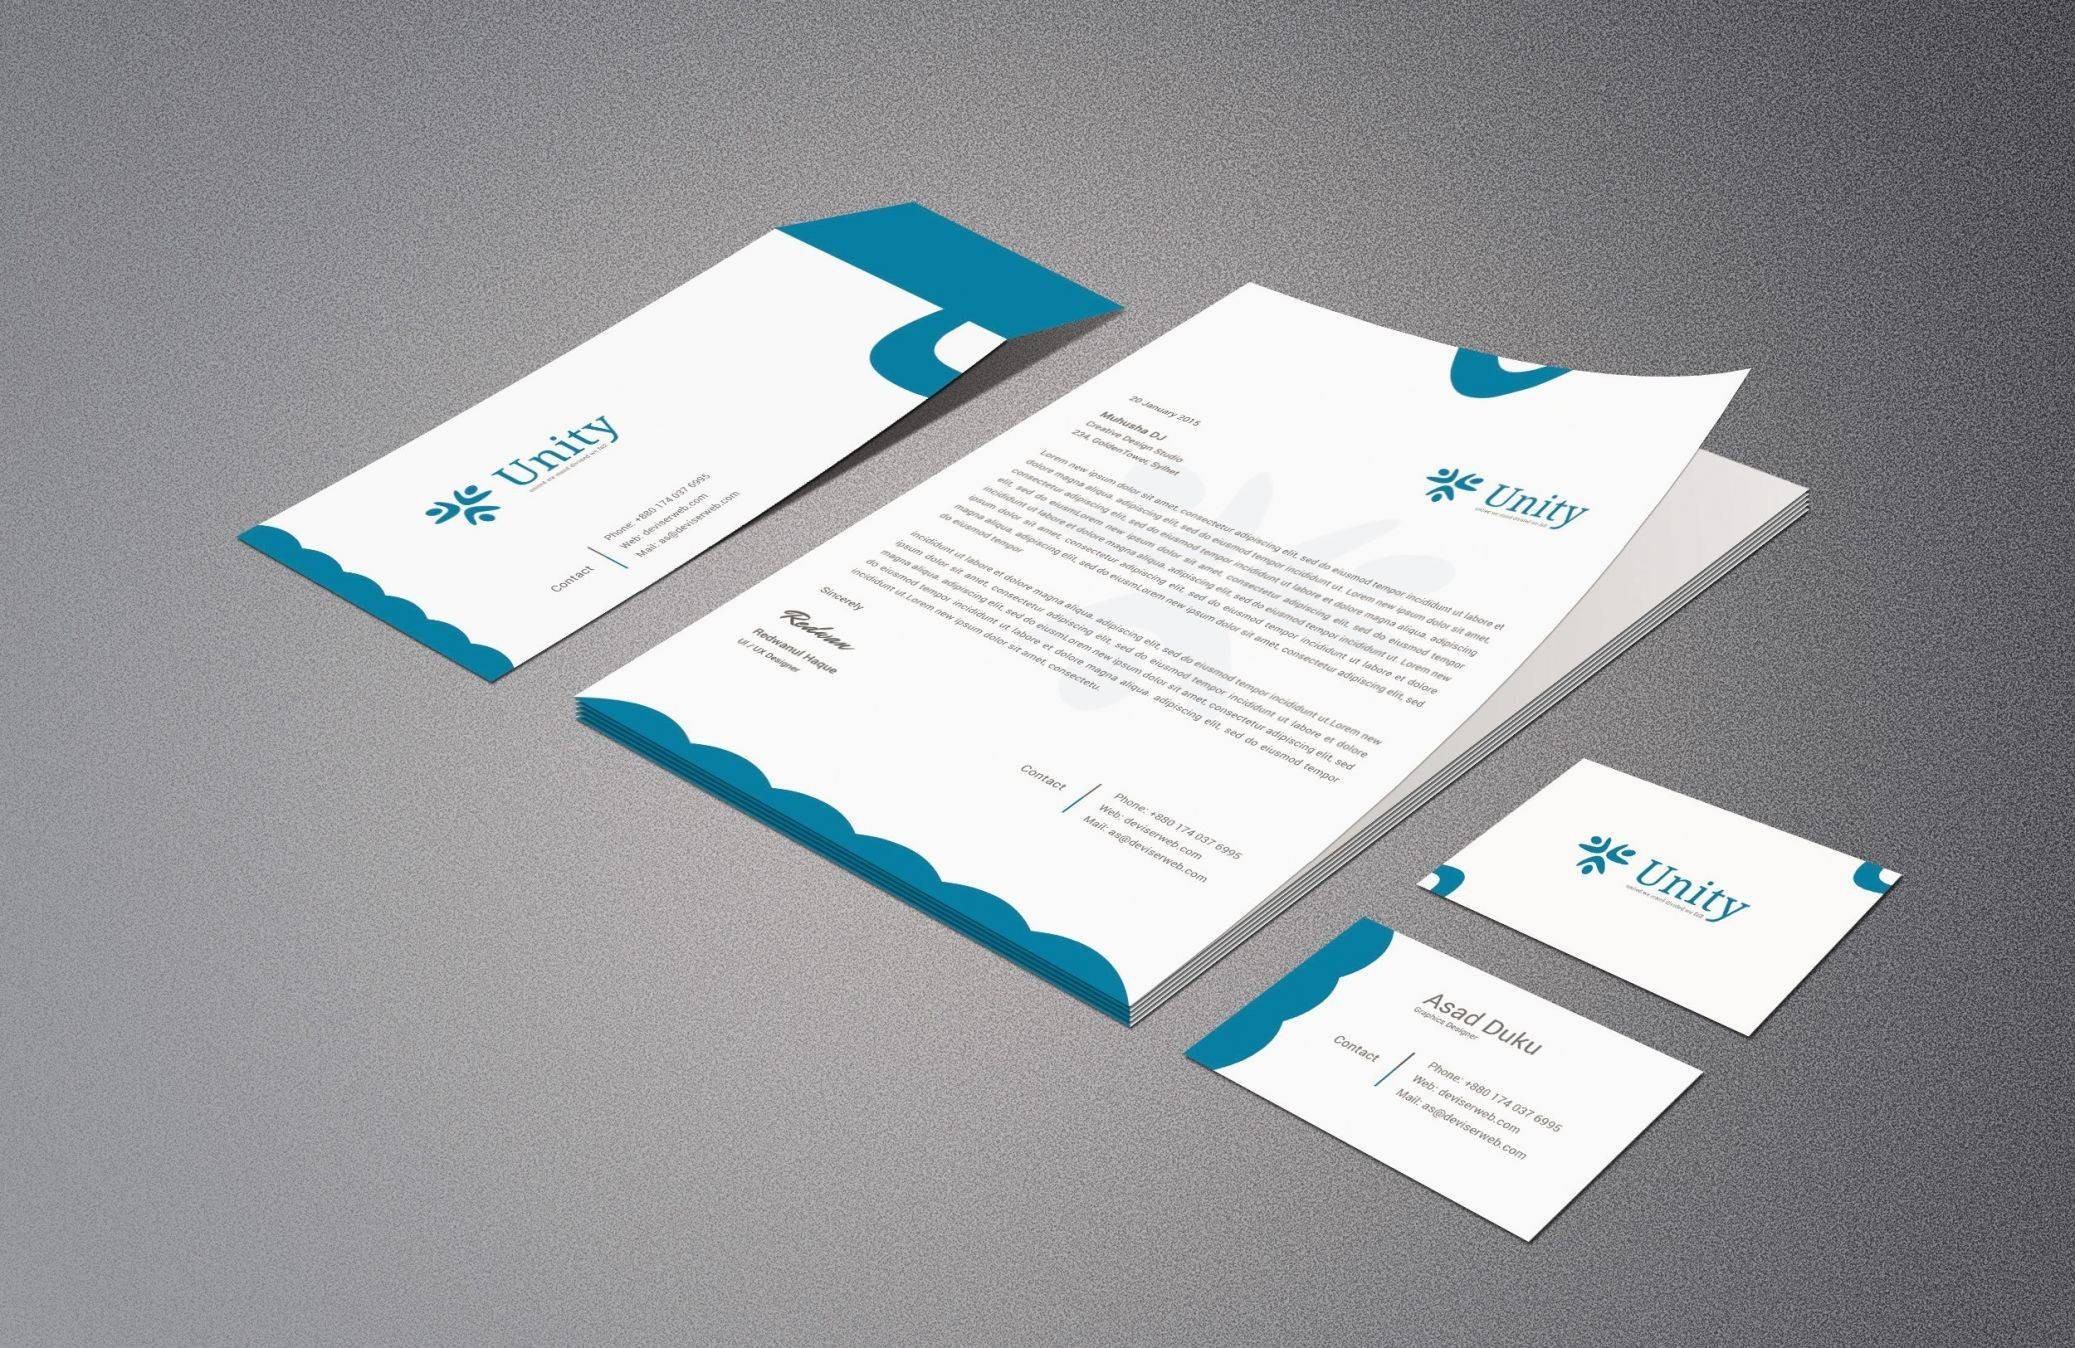 013 Business Card Template Free Download Ideas Psd Unique Of Business Card Psd Template Download